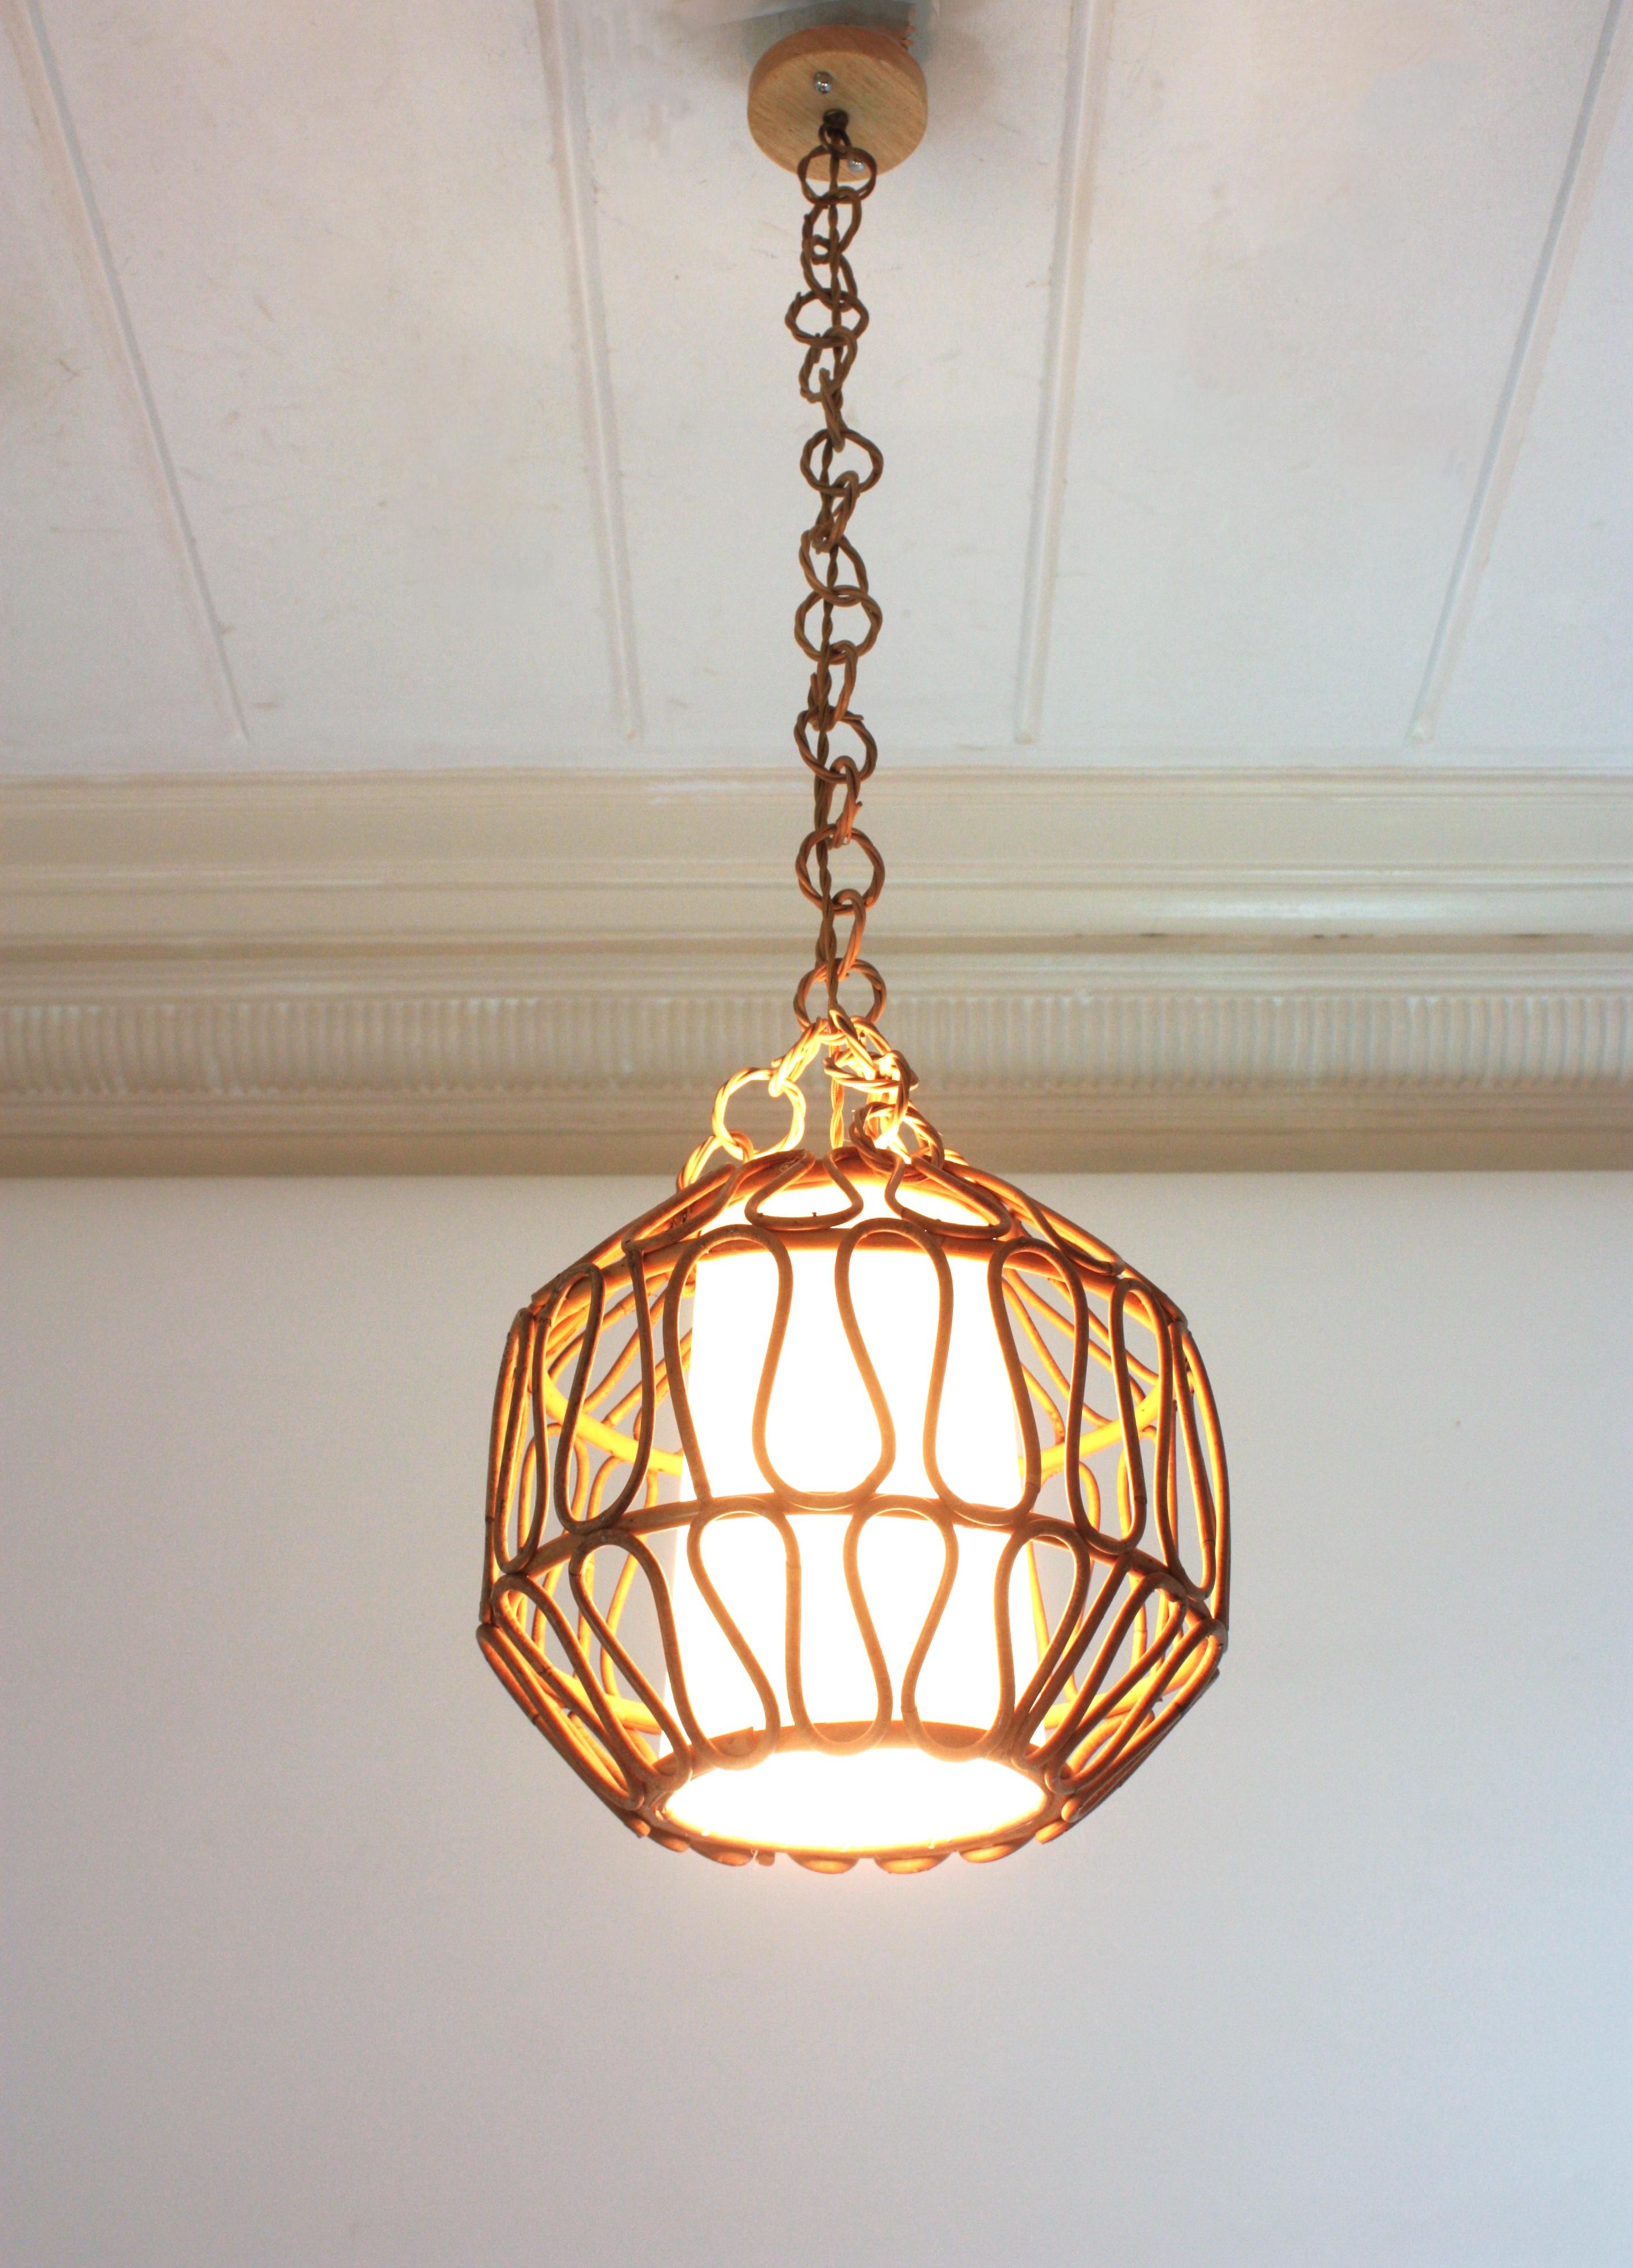 Hand-Crafted Rattan Globe Pendant Light or Lantern with Loop Details, Spain, 1960s For Sale